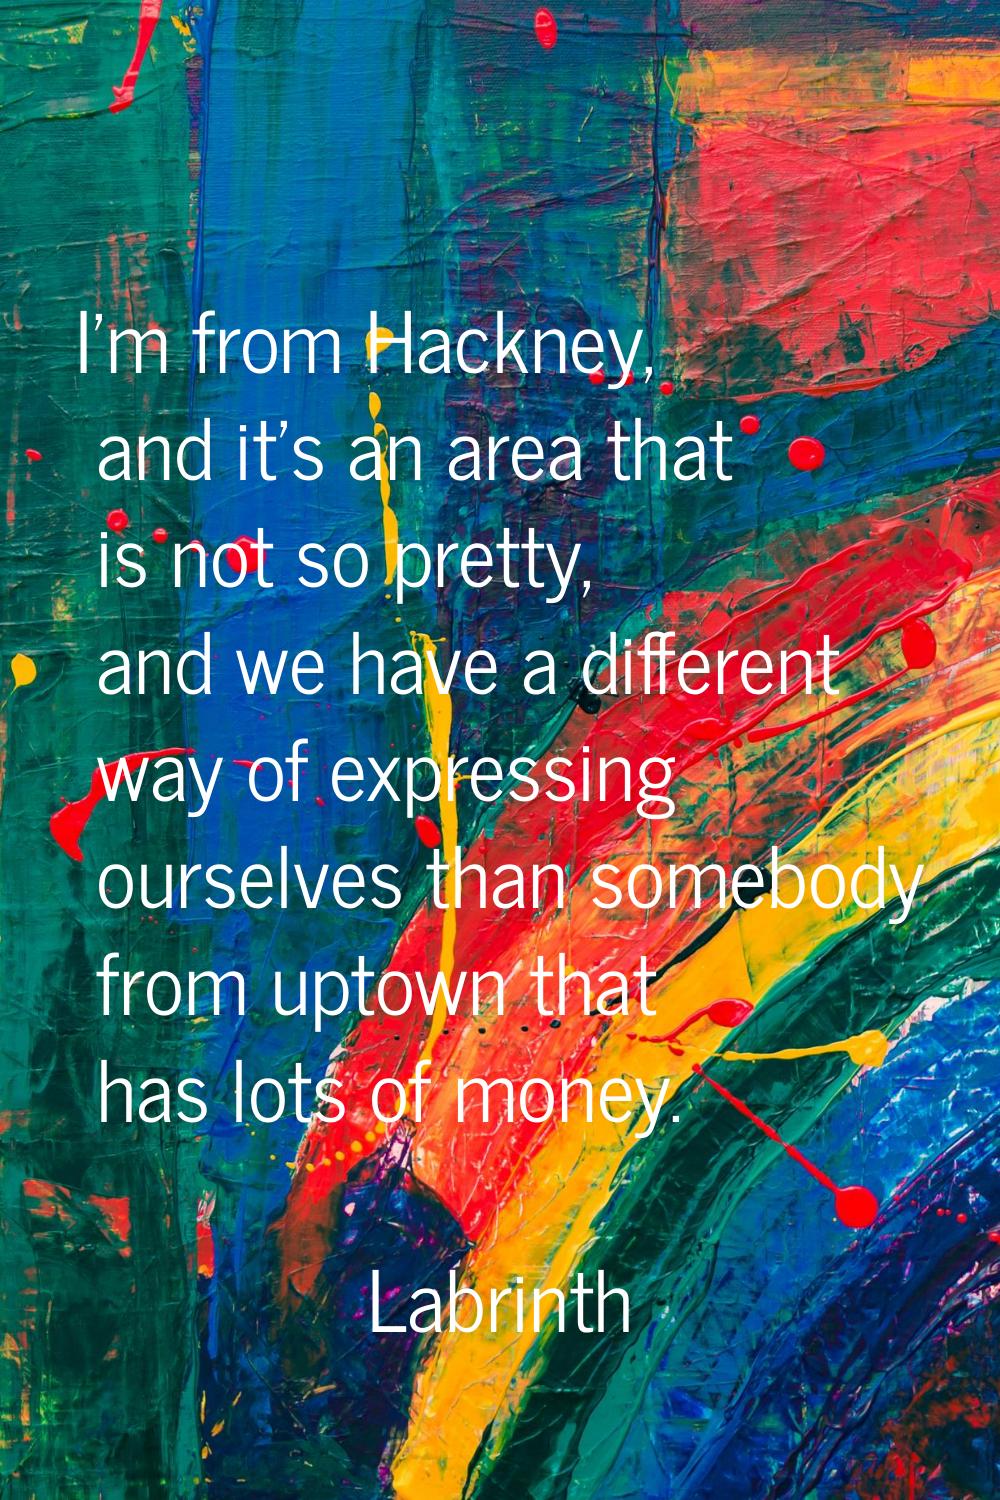 I'm from Hackney, and it's an area that is not so pretty, and we have a different way of expressing